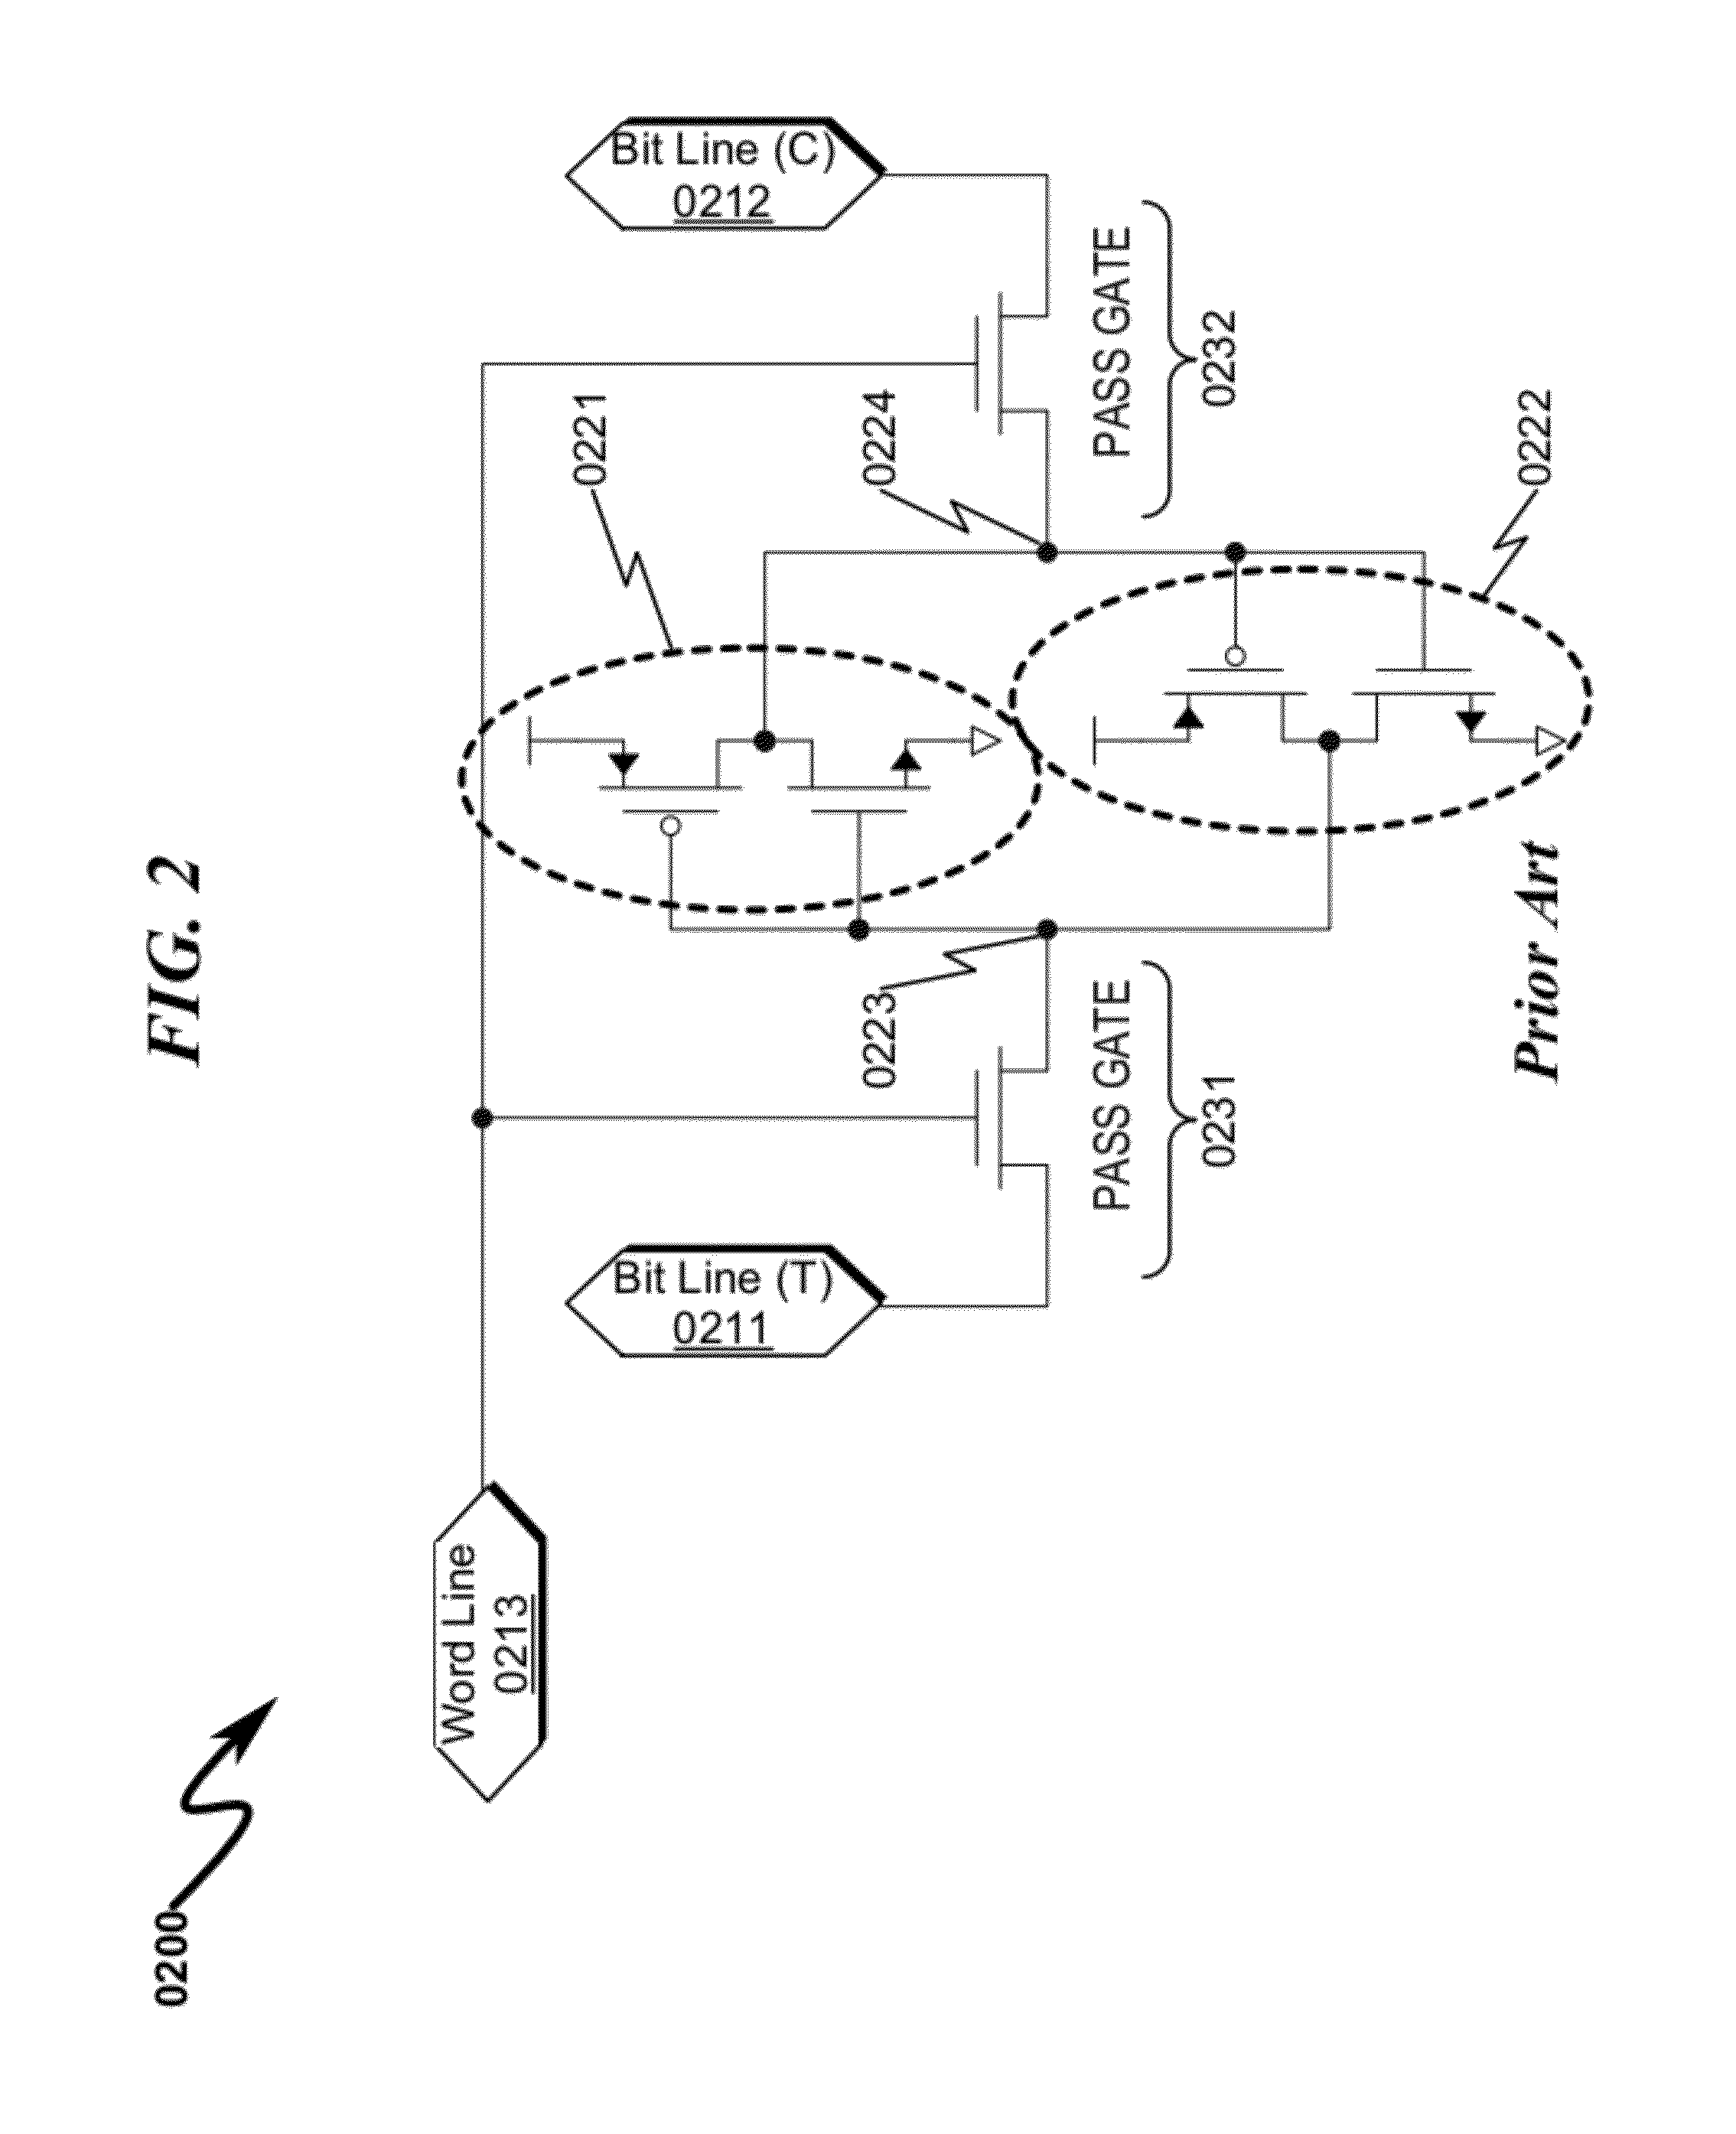 Memory Cell System and Method